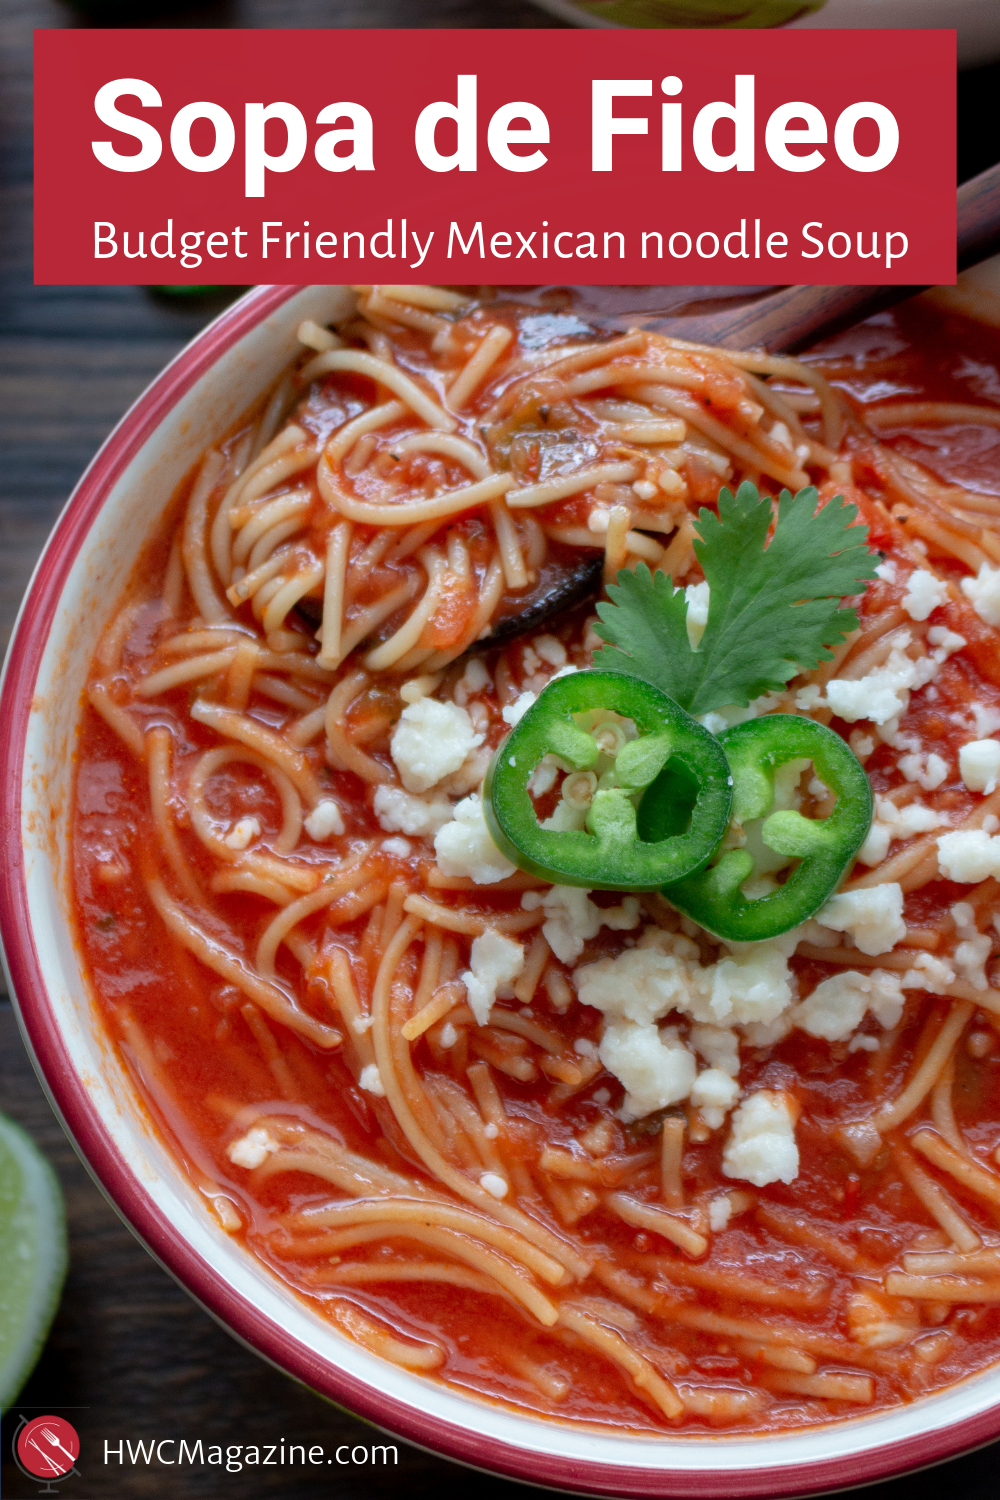 Sopa de Fideo is a delicious budget friendly Mexican Noodle Soup made with a vegetable tomato spicy broth with aromatics, herbs and pan-fried angel hair noodles. #mexican #spanish #soup #noodleswithoutborders #noodles #soup #budgetfriendly #easyrecipe #vegetarian #weekdaymeals / https://www.hwcmagazine.com